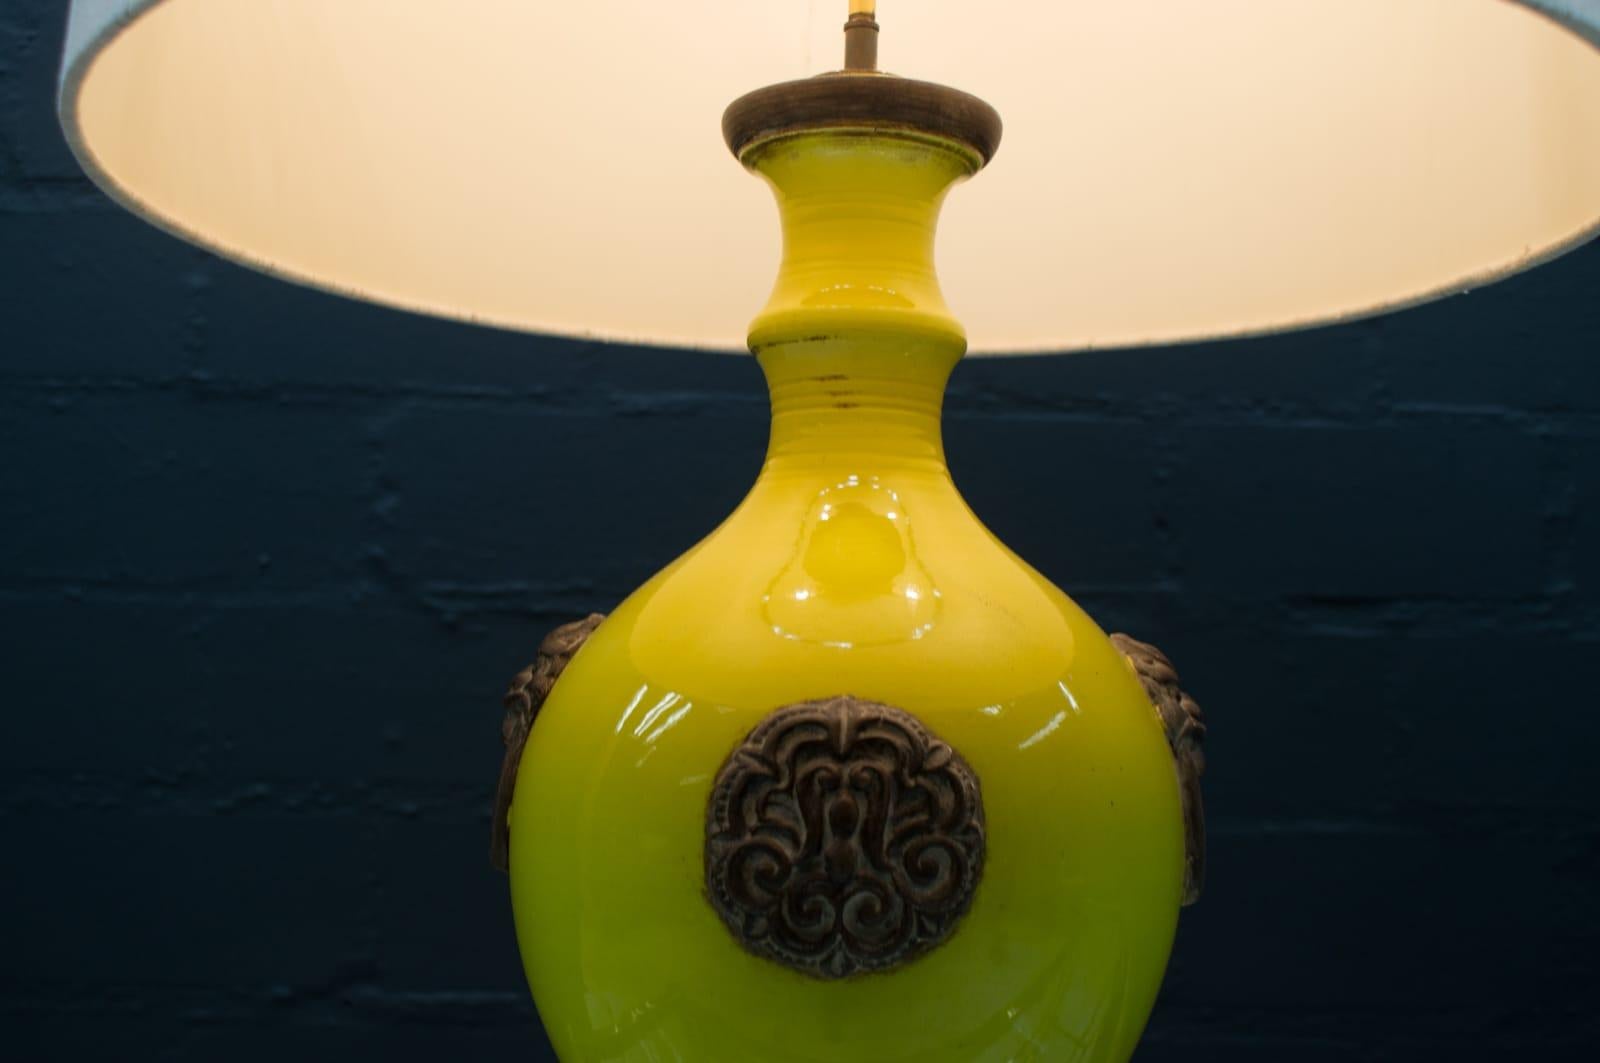 Oatmeal and Yellow Gilt Glazed Ceramic Table Lamp by Ugo Zaccagnini, Italy 1960s For Sale 3